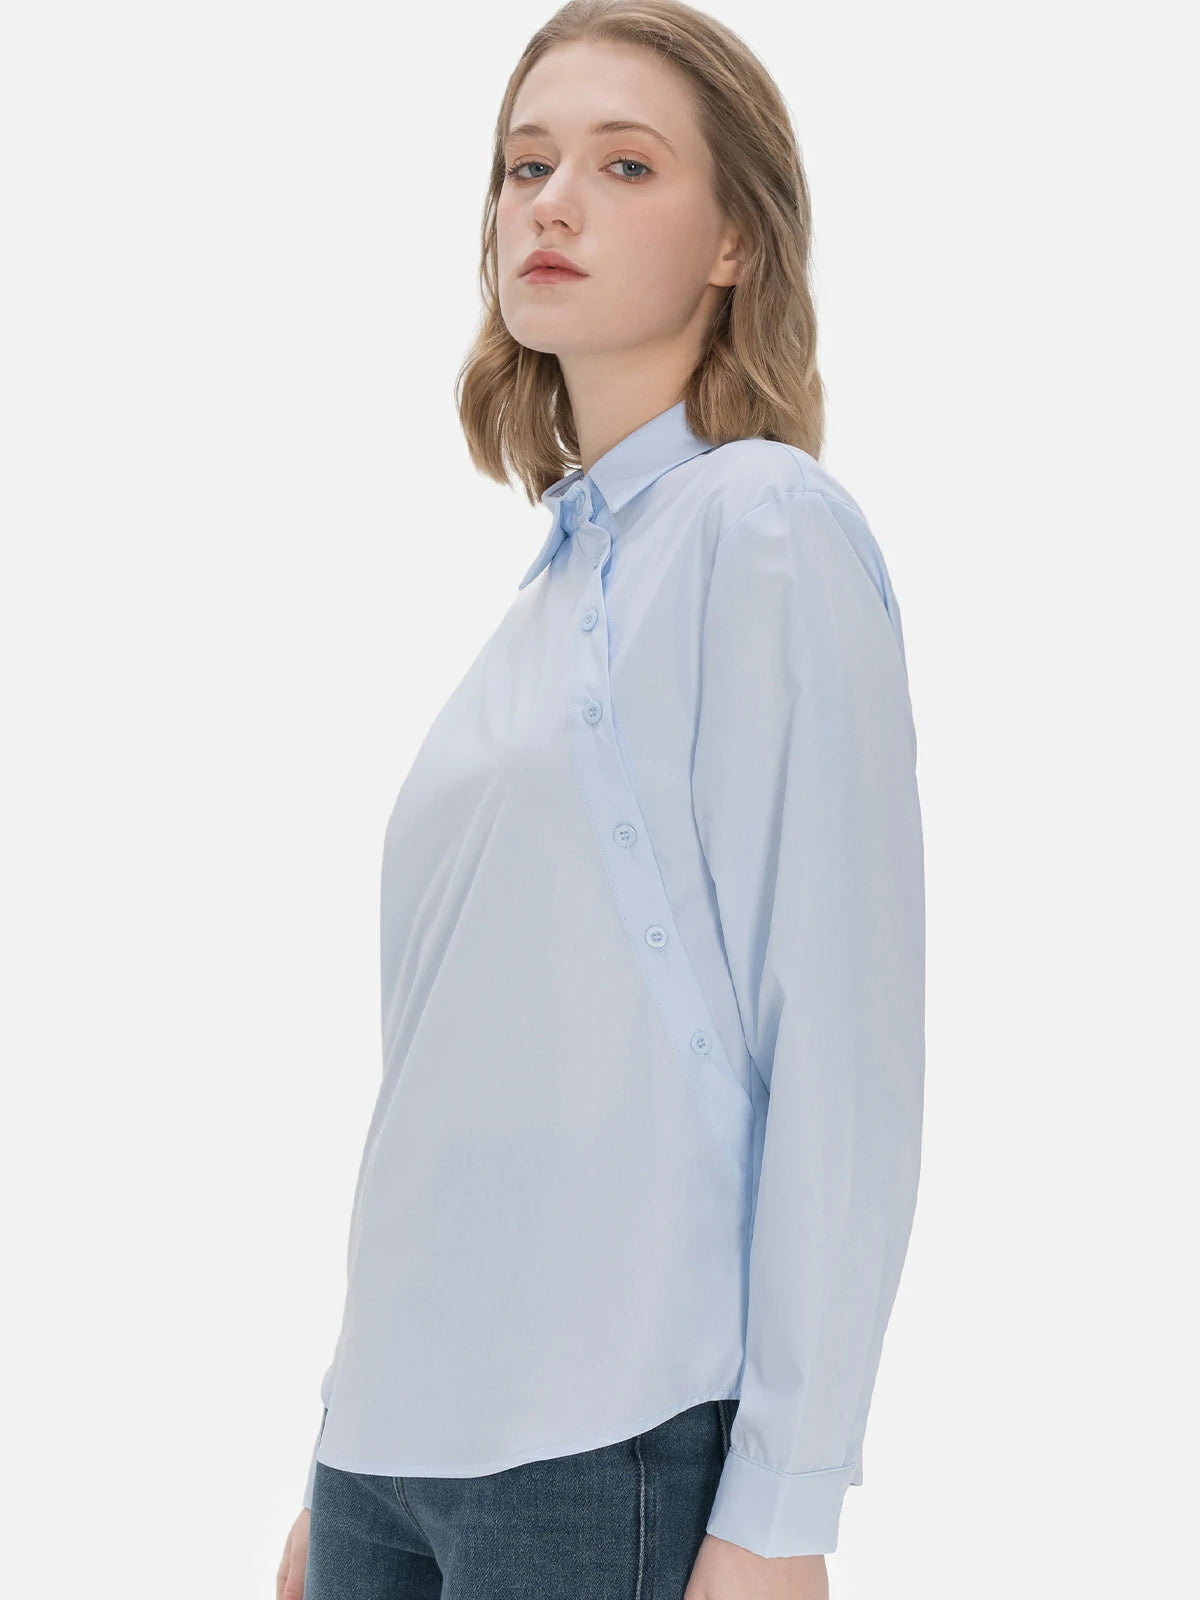 Versatile ladies&#39; shirt in classic blue, adorned with a unique diagonal button design, combining elegance and fashion for a chic and timeless ensemble.